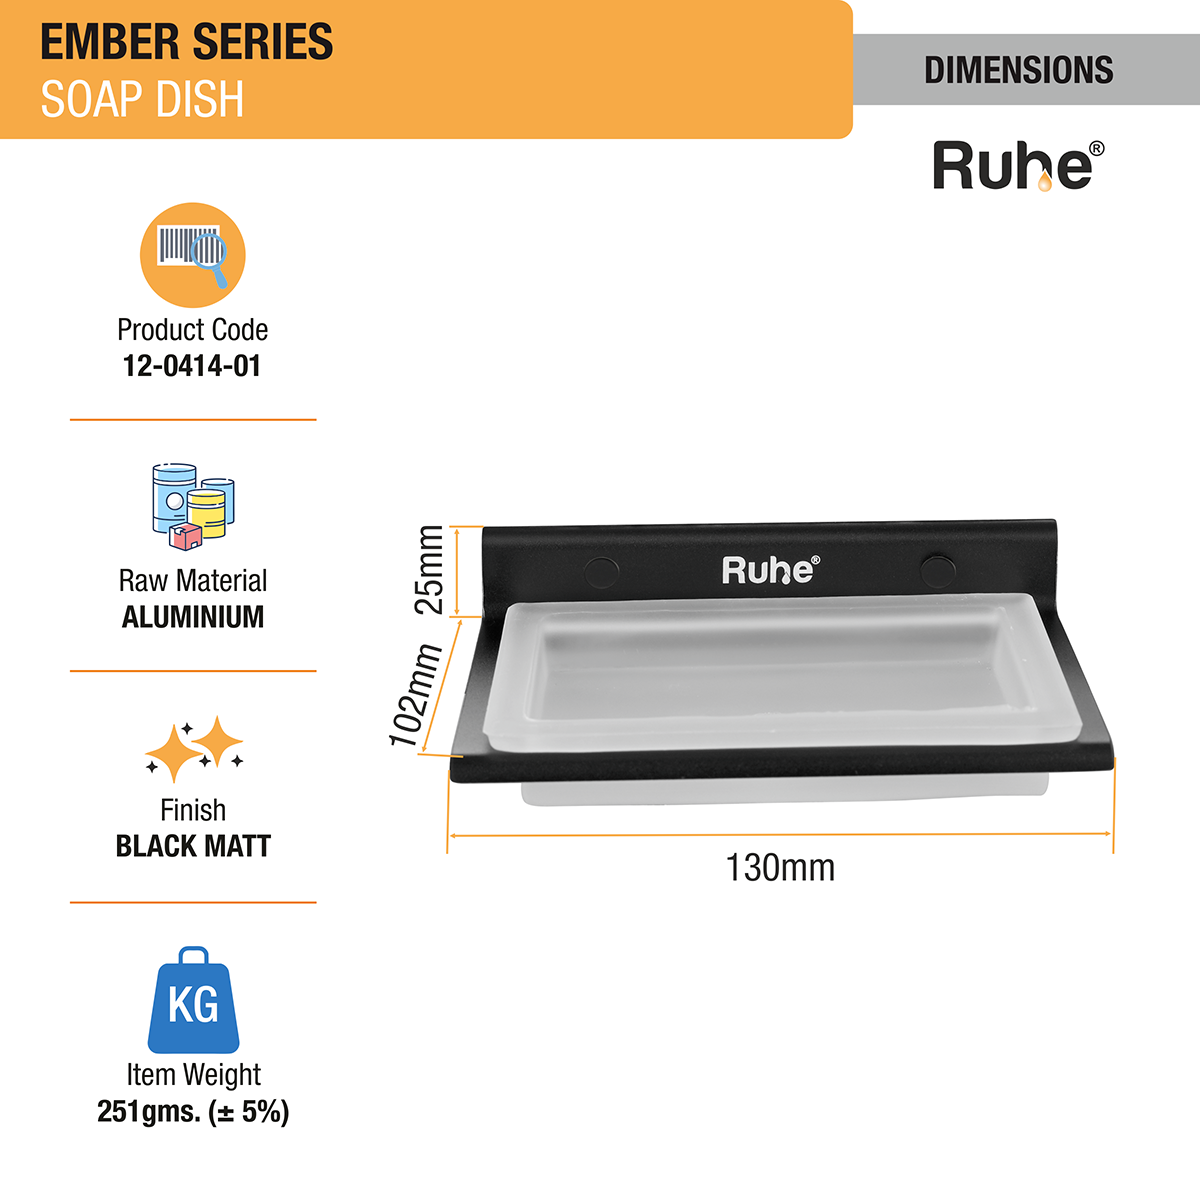 Ember Soap Dish (Space Aluminium) dimensions and sizes